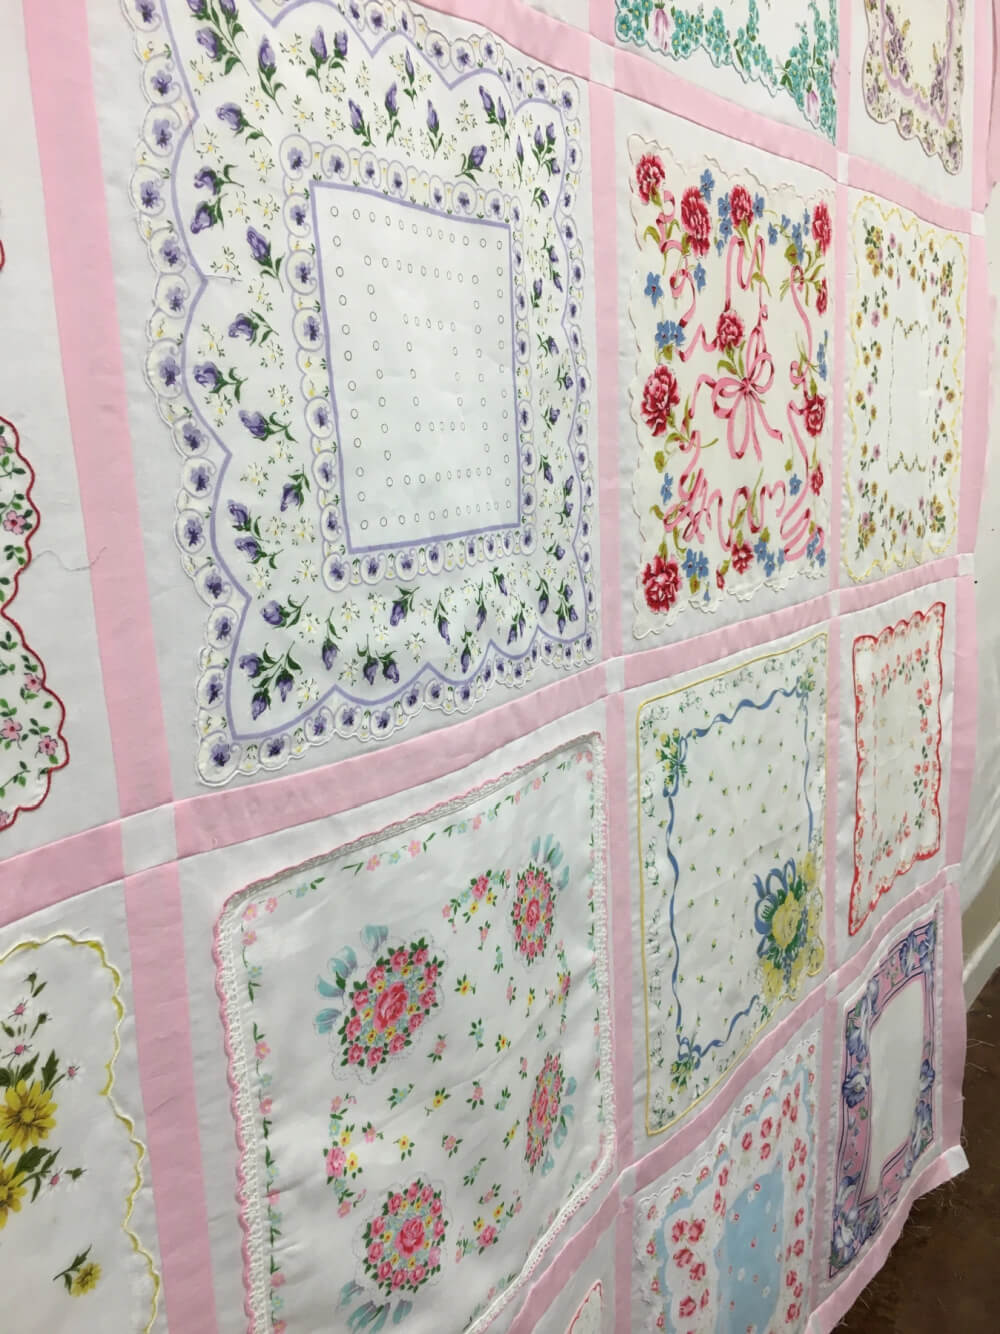 Vintage hankies sewn into a quilt